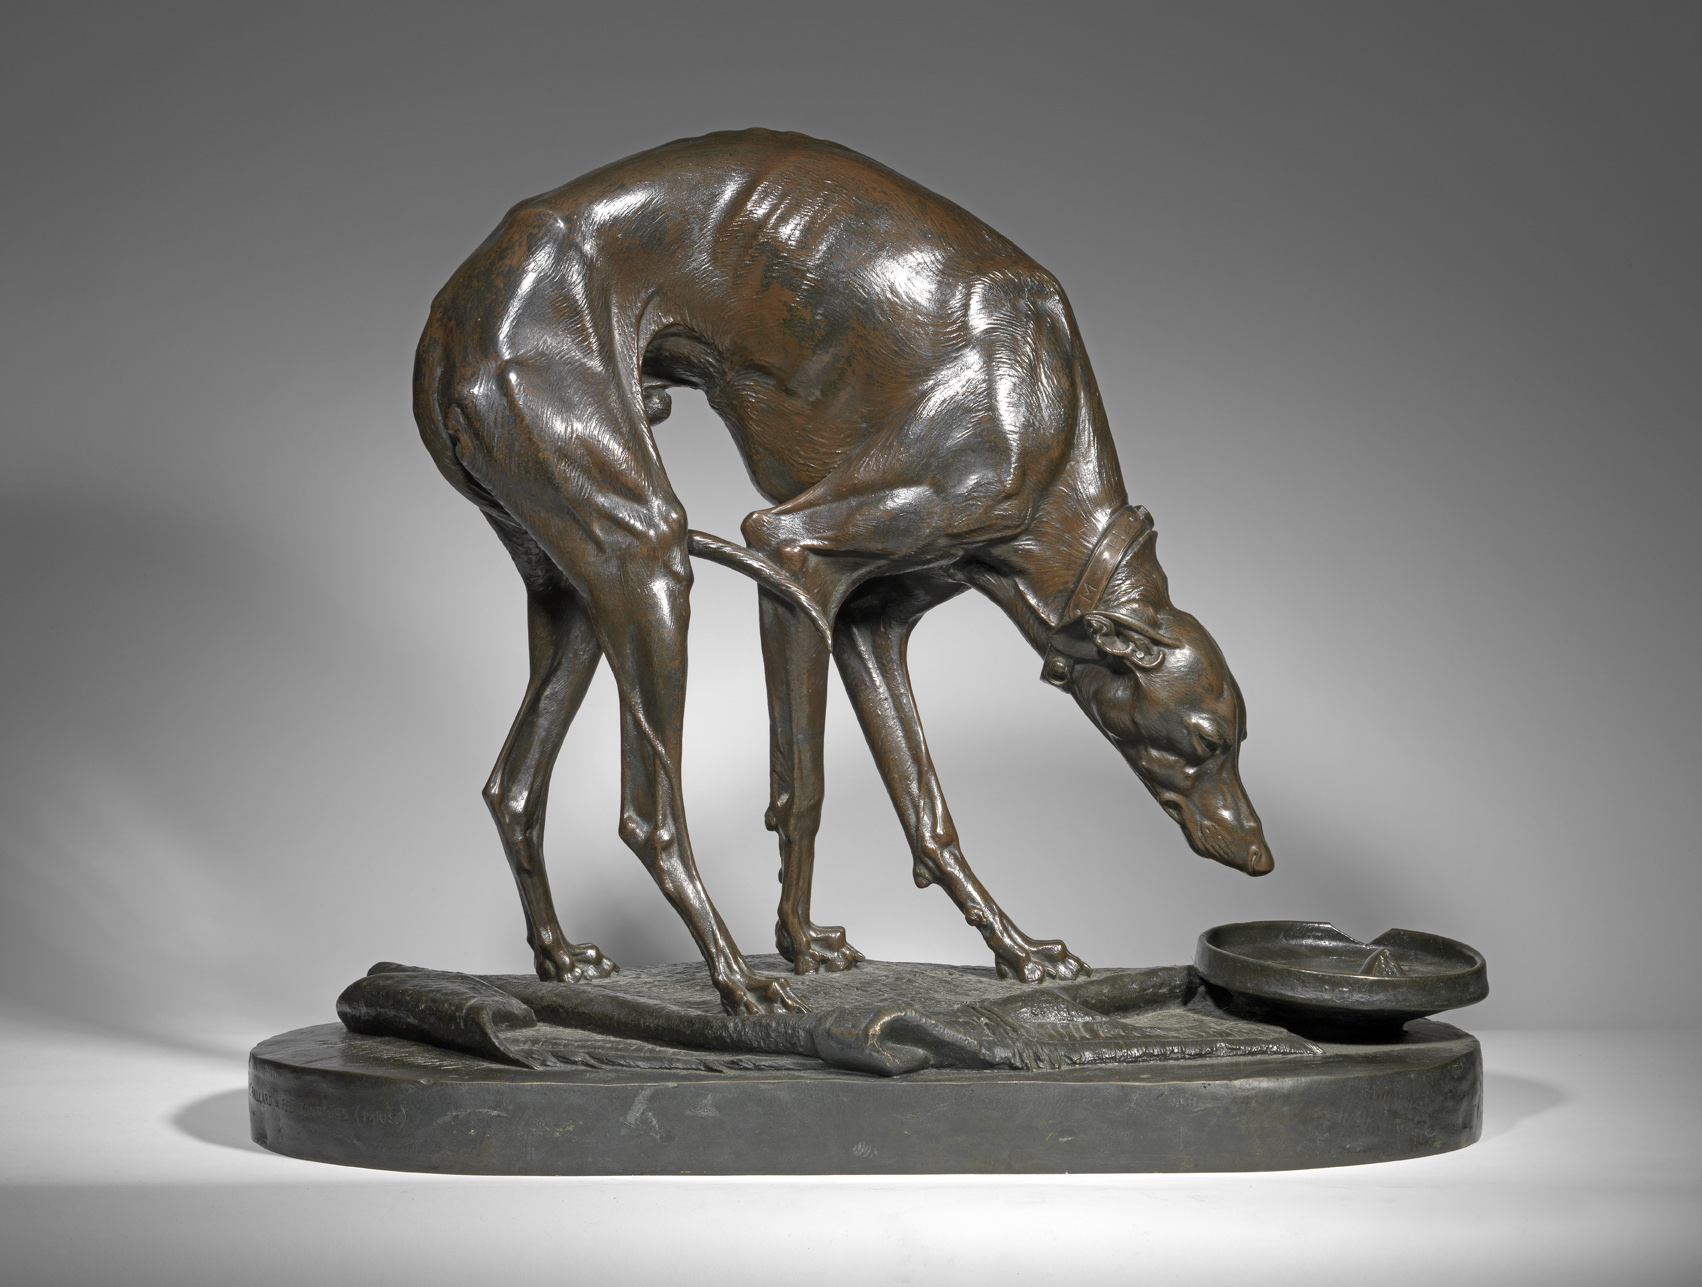 Whippet drinking from a Bowl, life-size, c.1880